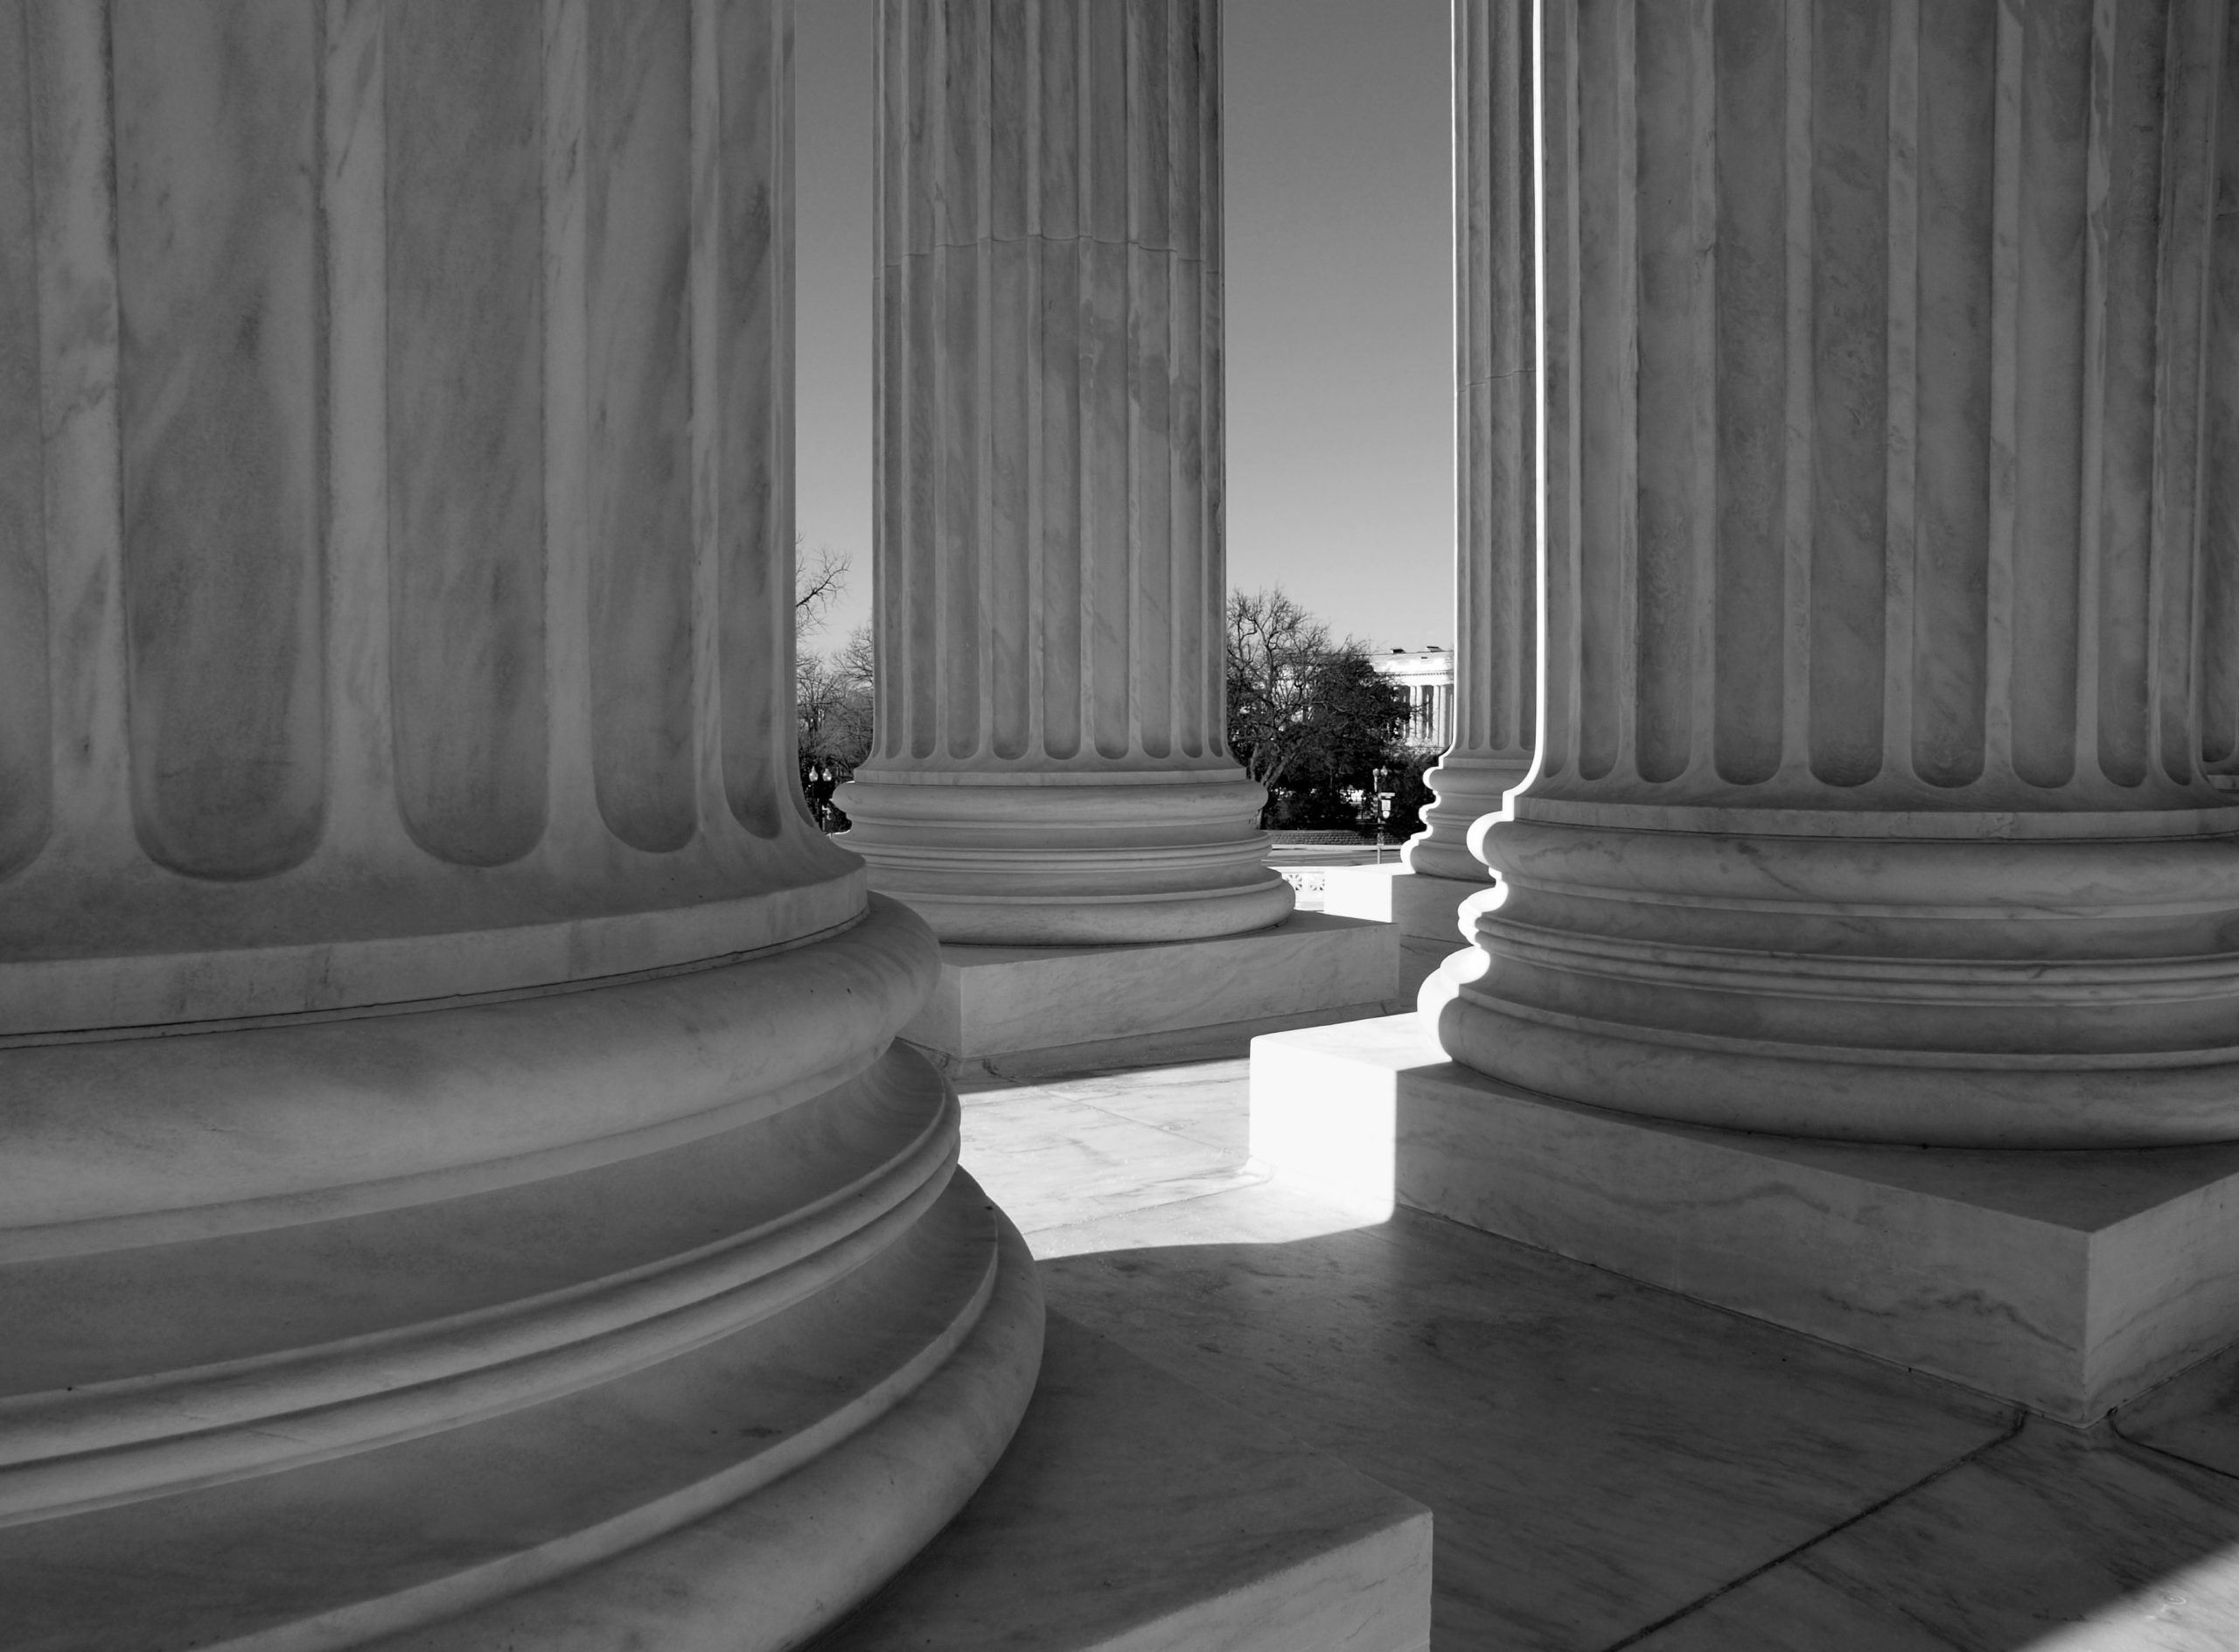 6 to 3: The Impact of the Supreme Court’s Conservative Super-Majority